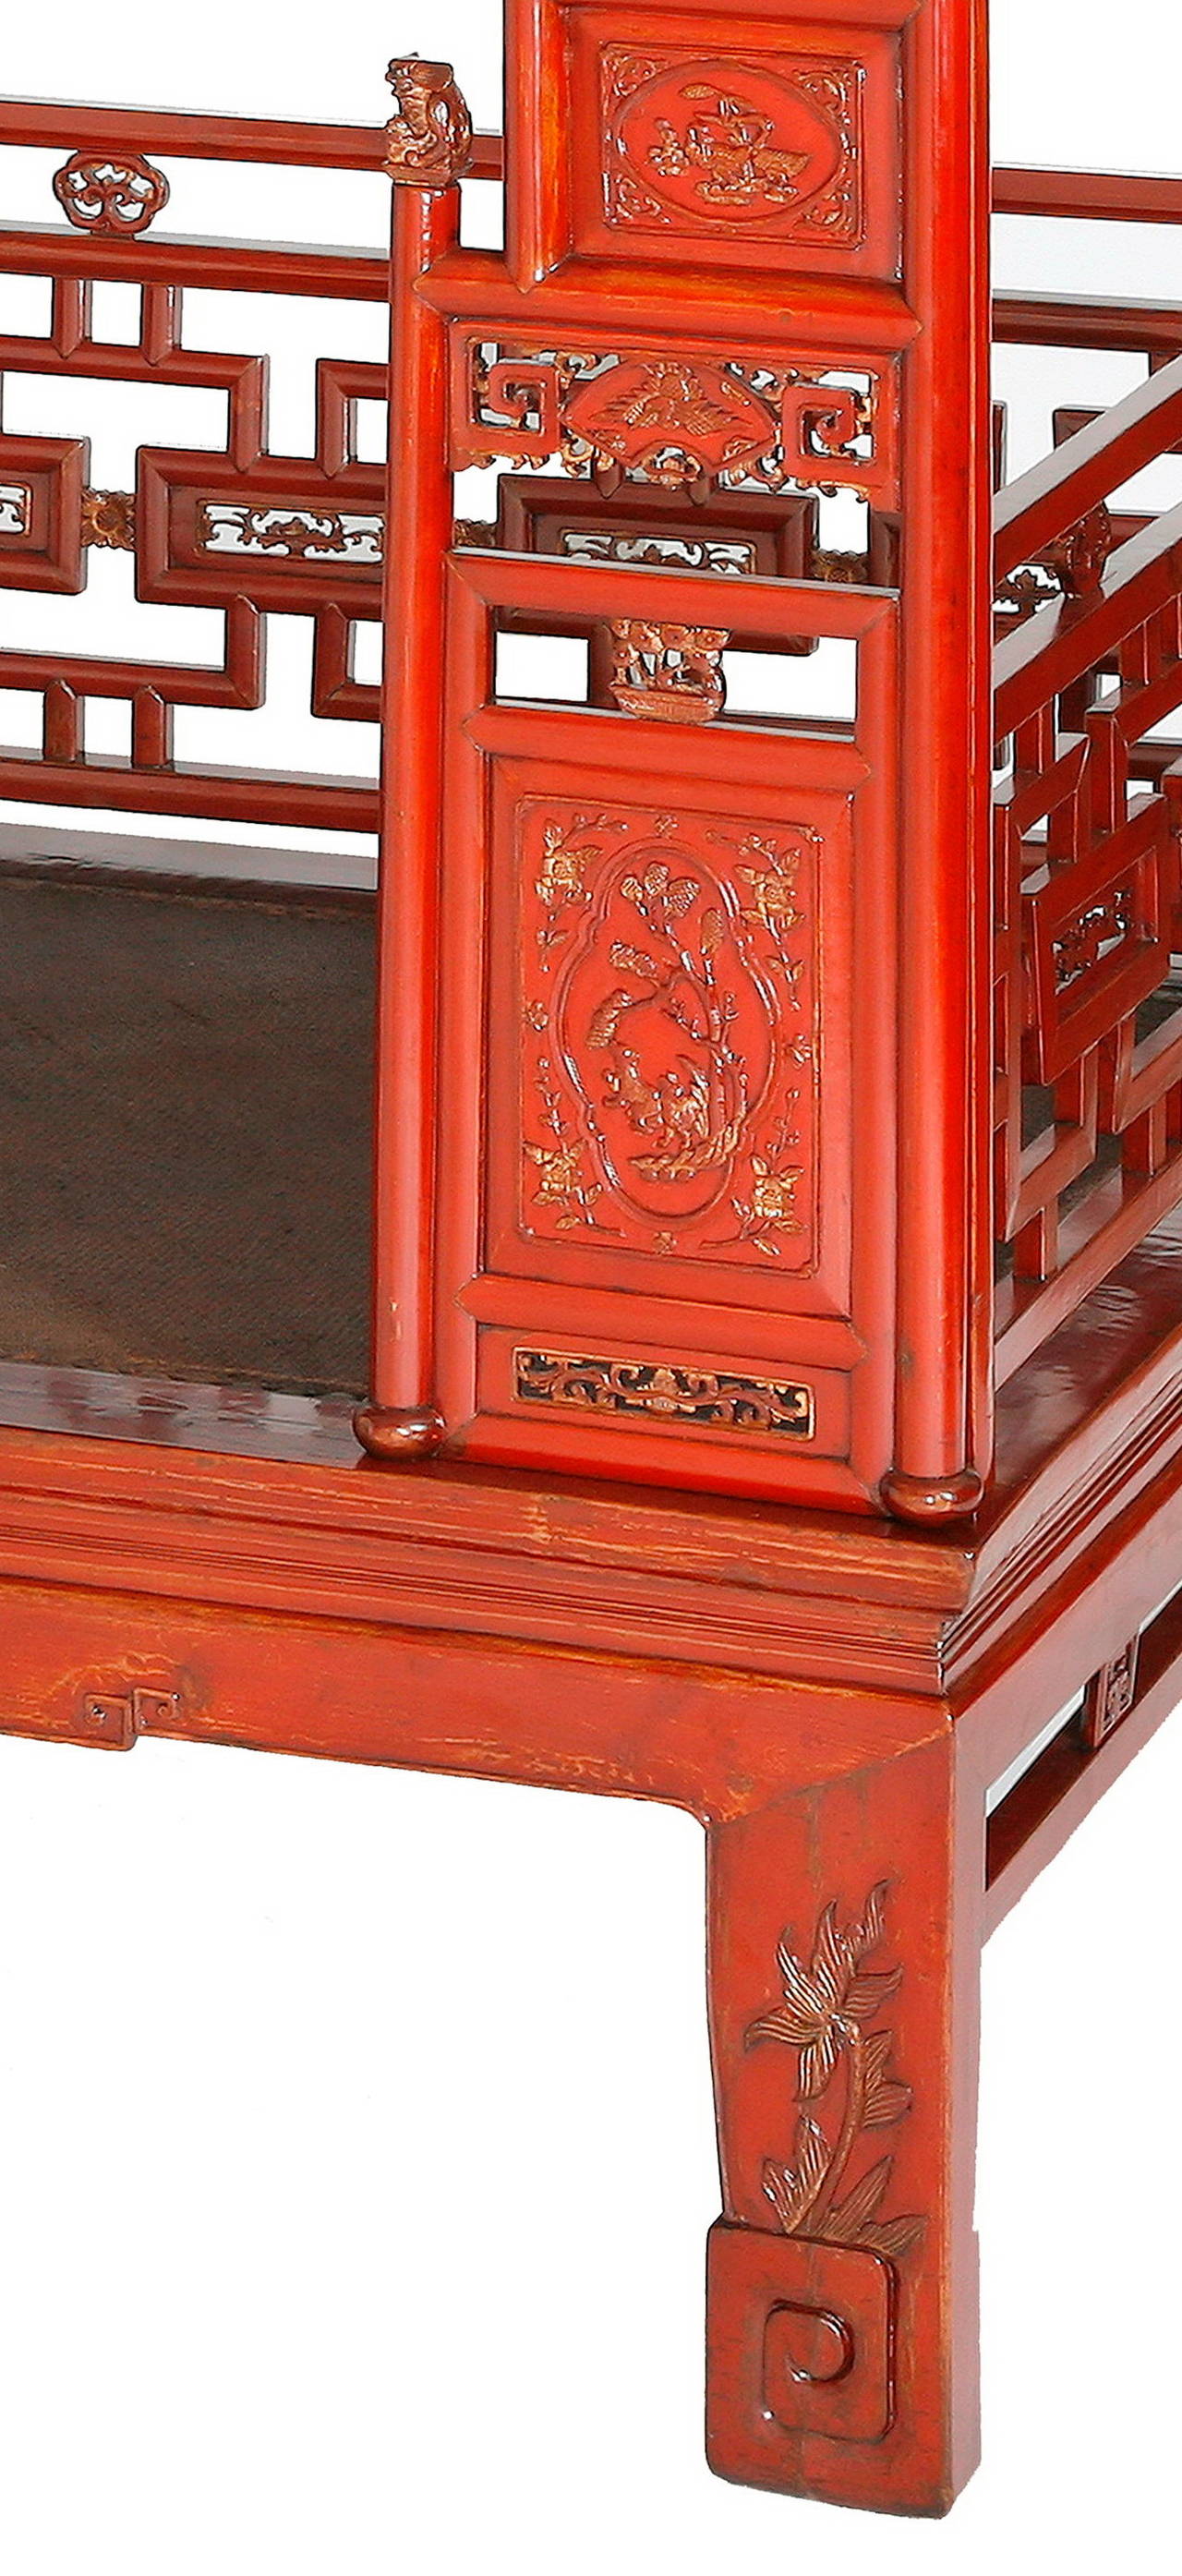 Hand-Crafted Antique Red Lacquer Gilt Six-Posted Carved Canopy or Wedding Bed, Chinoiserie